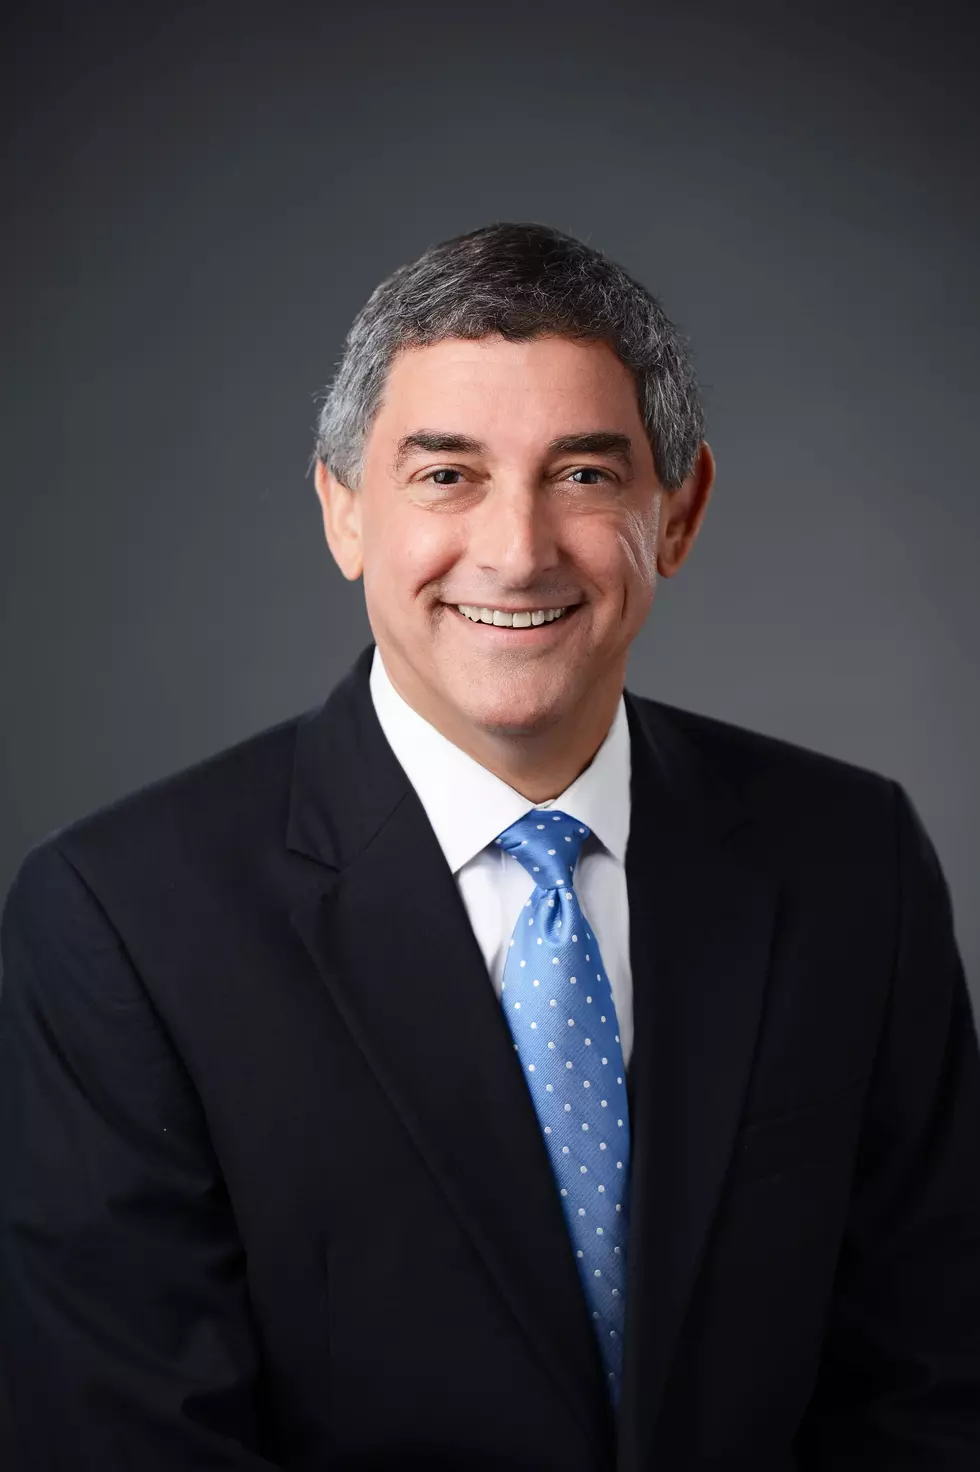 Jay Dardenne Talks about Revenues